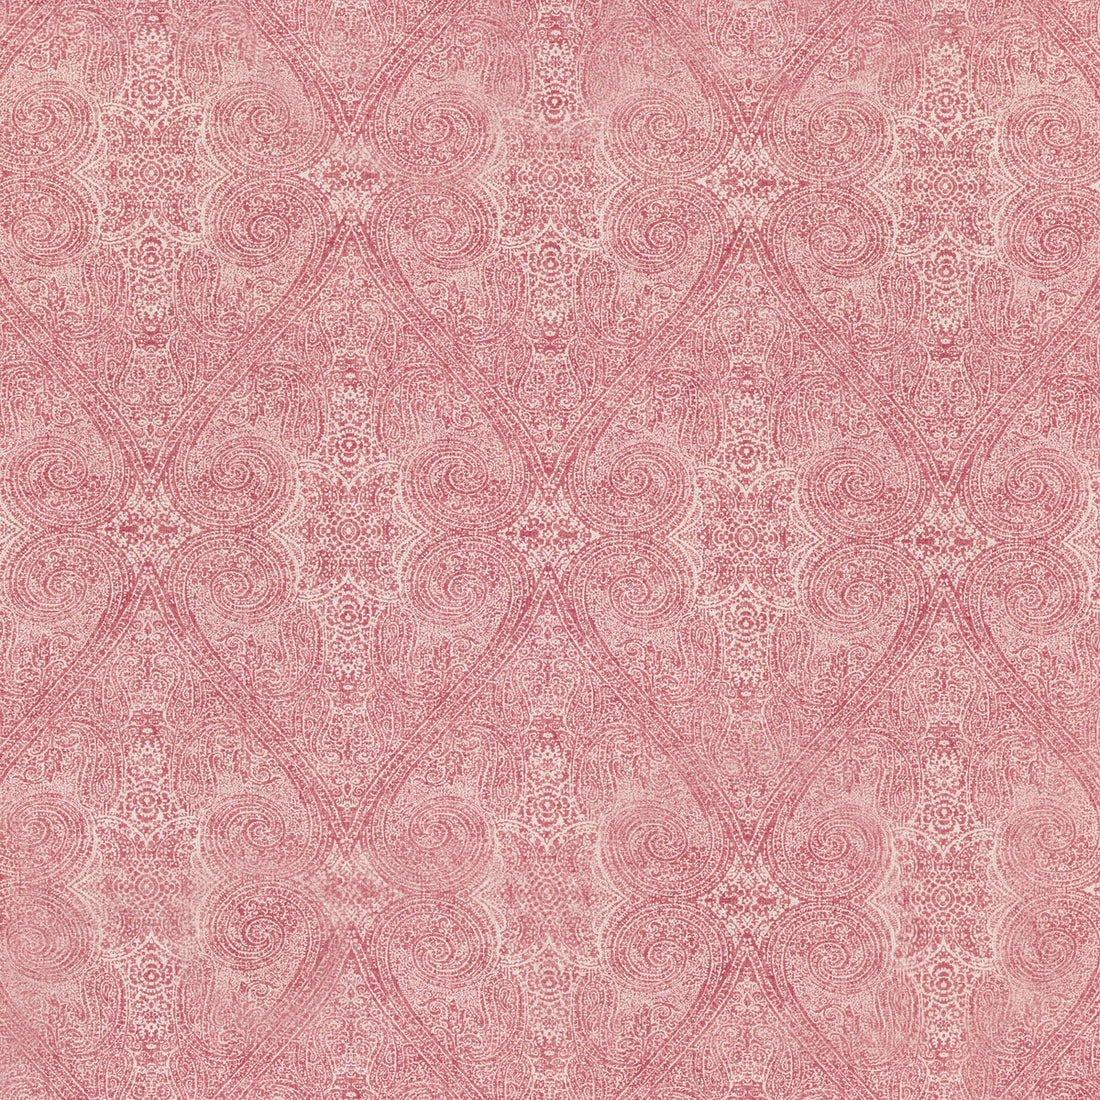 Marida fabric in fuchsia color - pattern PP50449.2.0 - by Baker Lifestyle in the Homes &amp; Gardens III collection